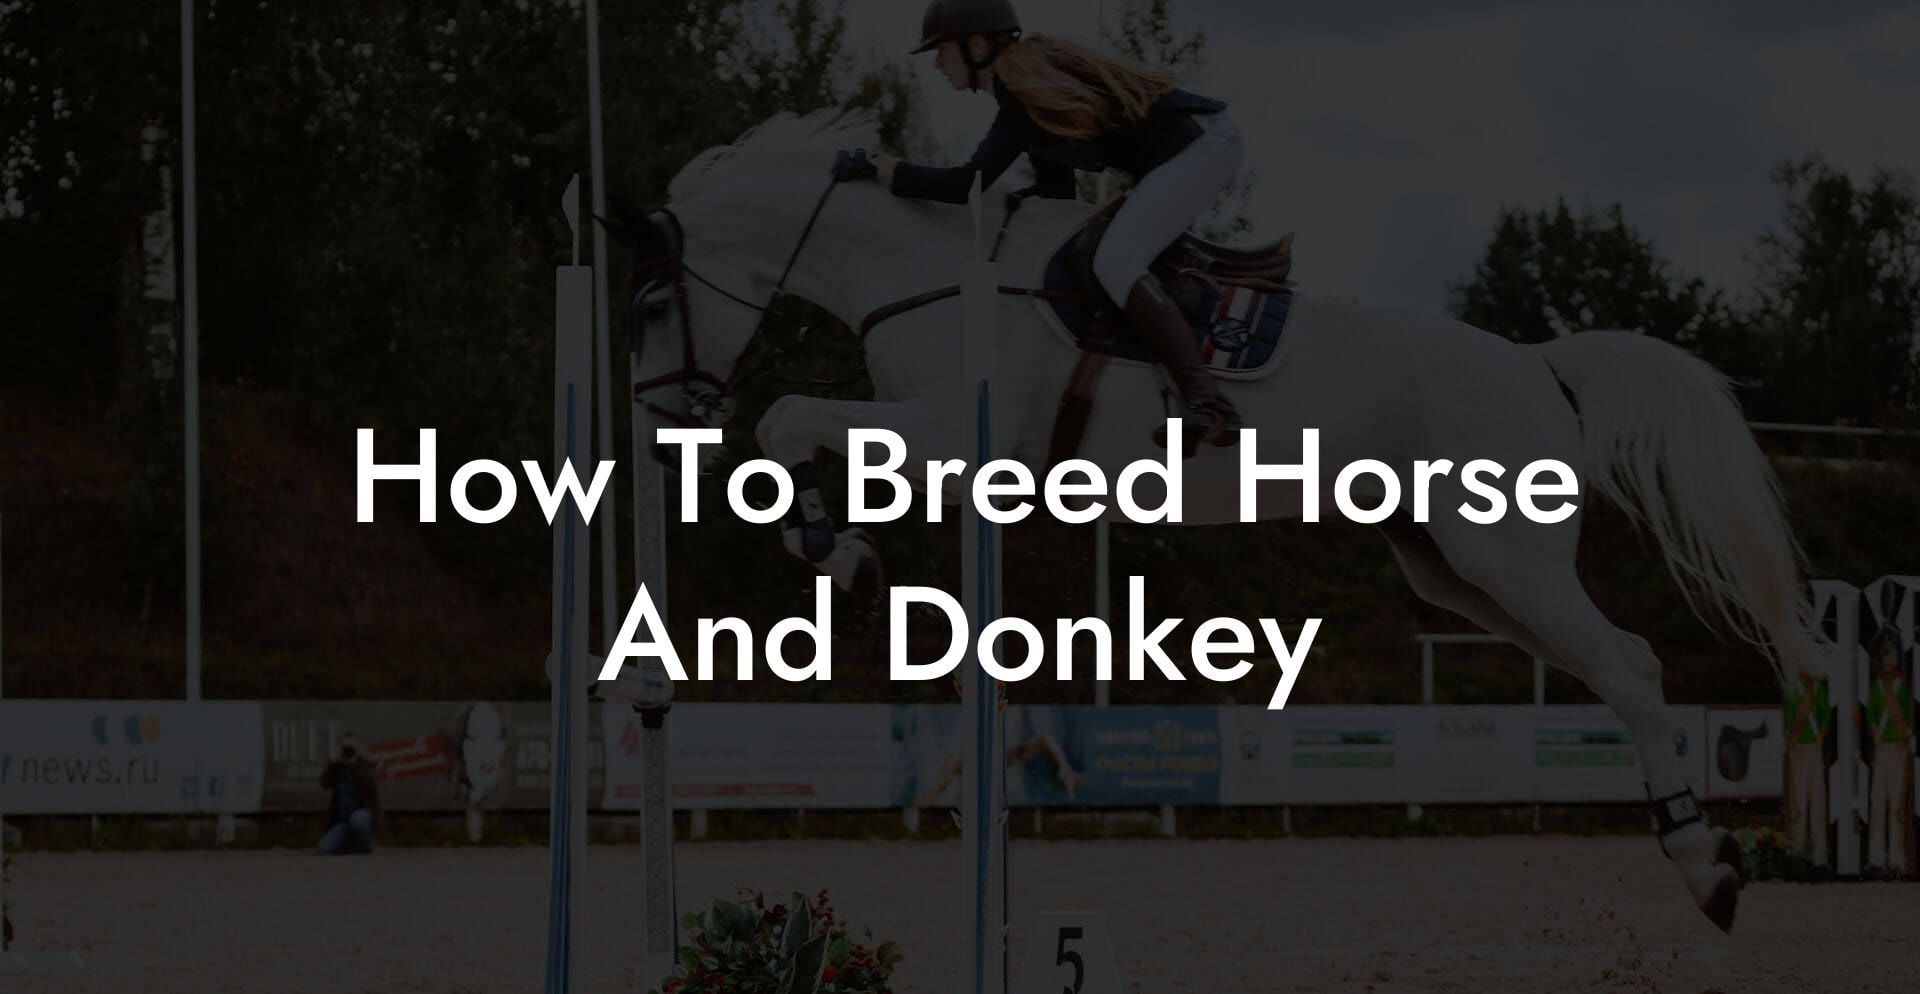 How To Breed Horse And Donkey